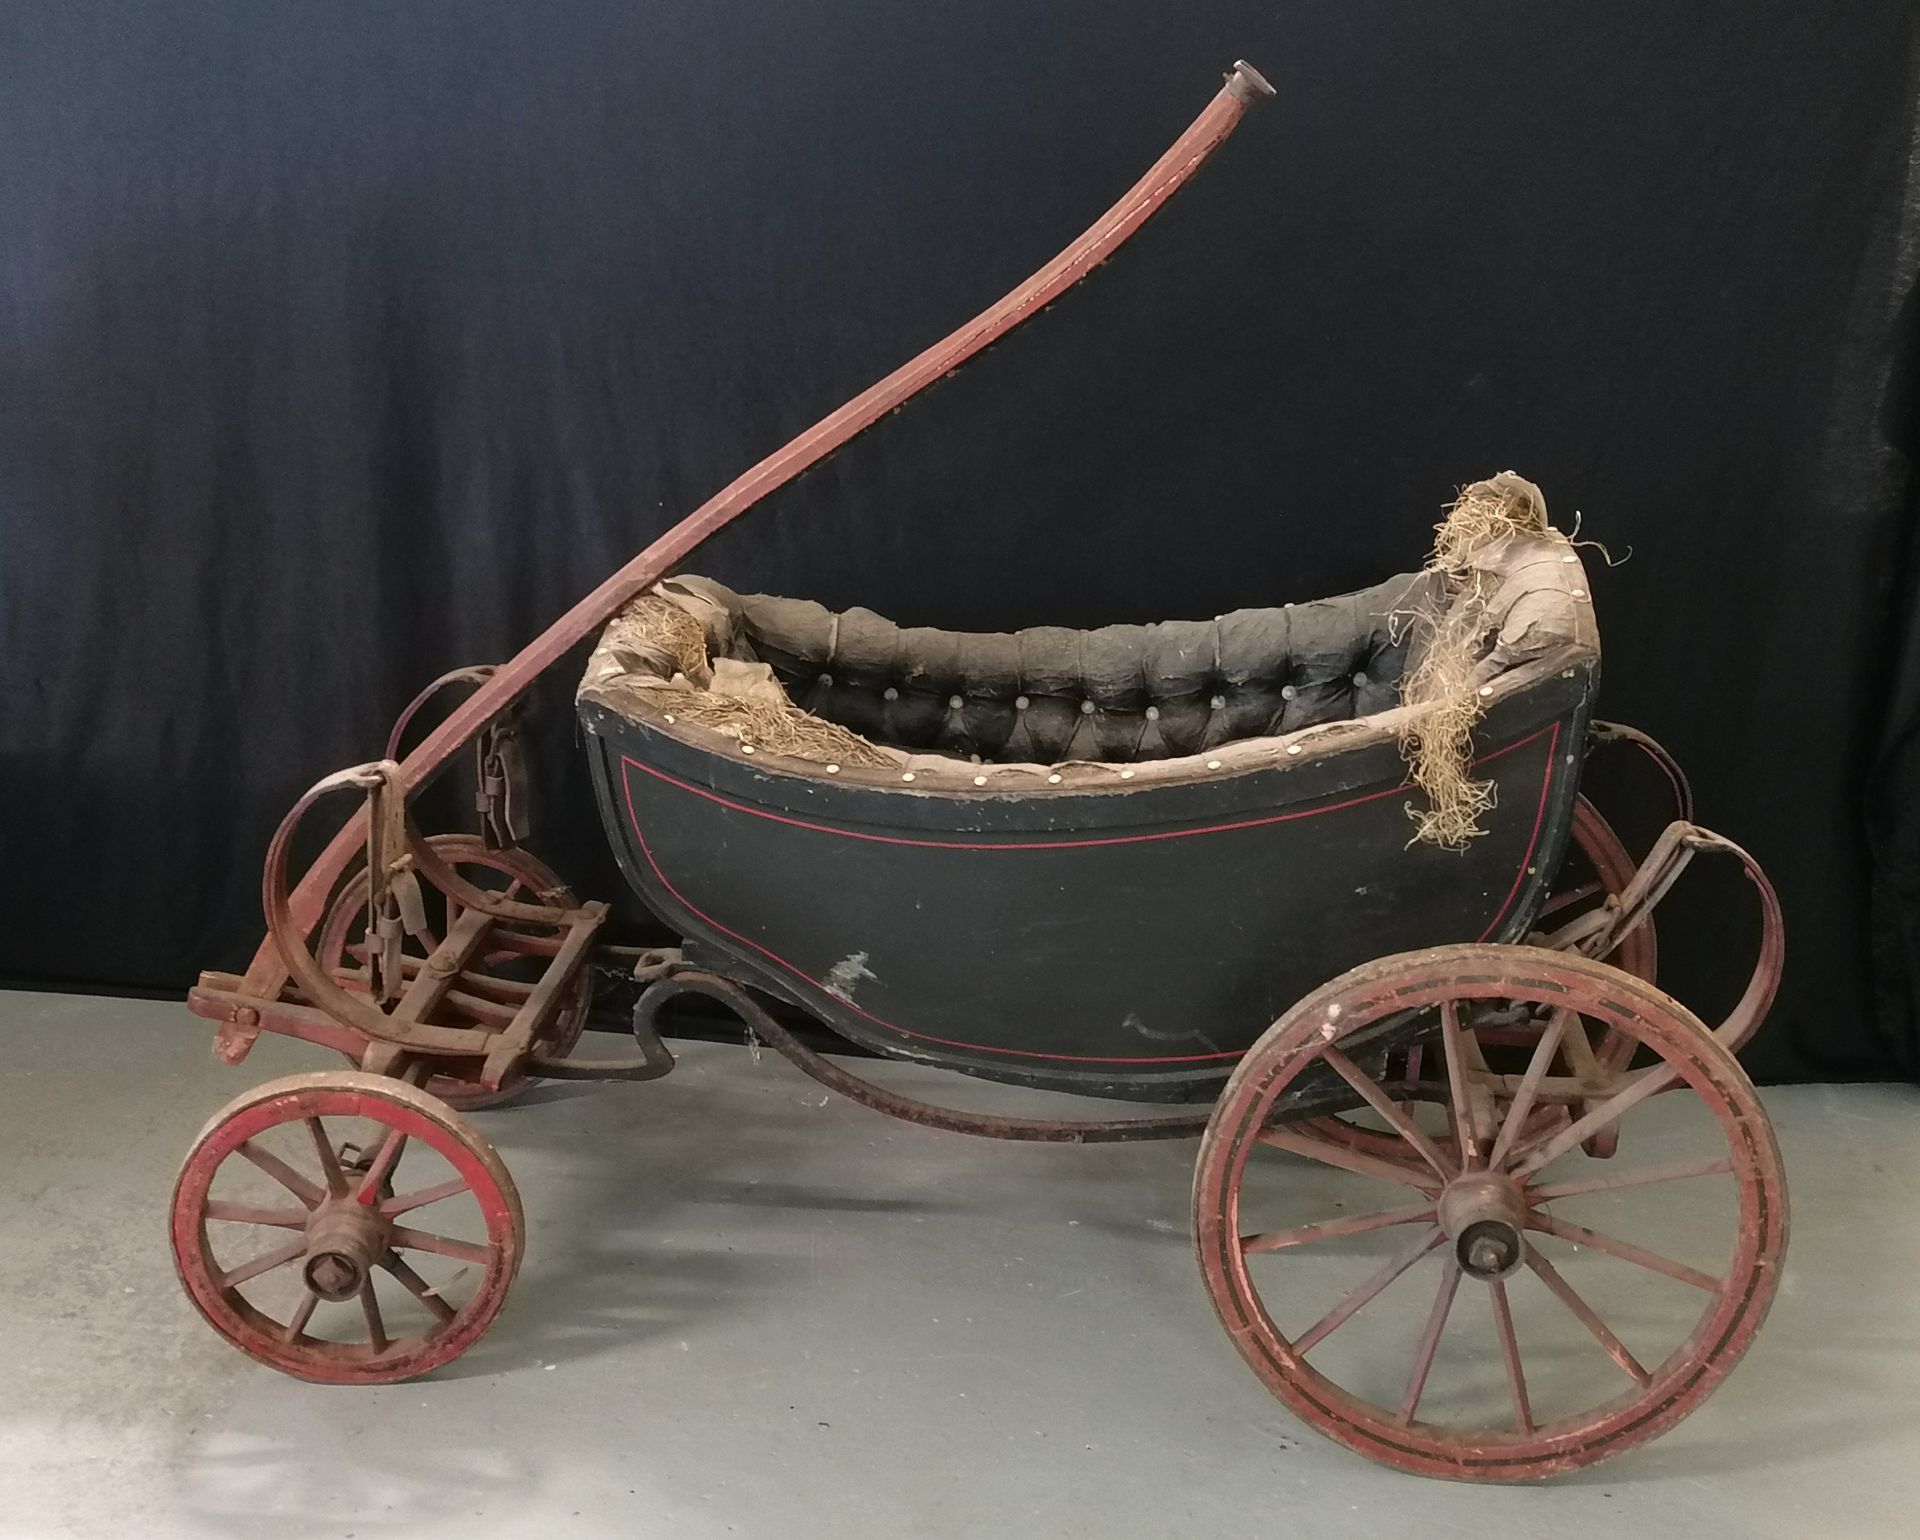 Null HORSE-DRAWN CARRIAGE

Children's carriage designed to be pulled by small dr&hellip;